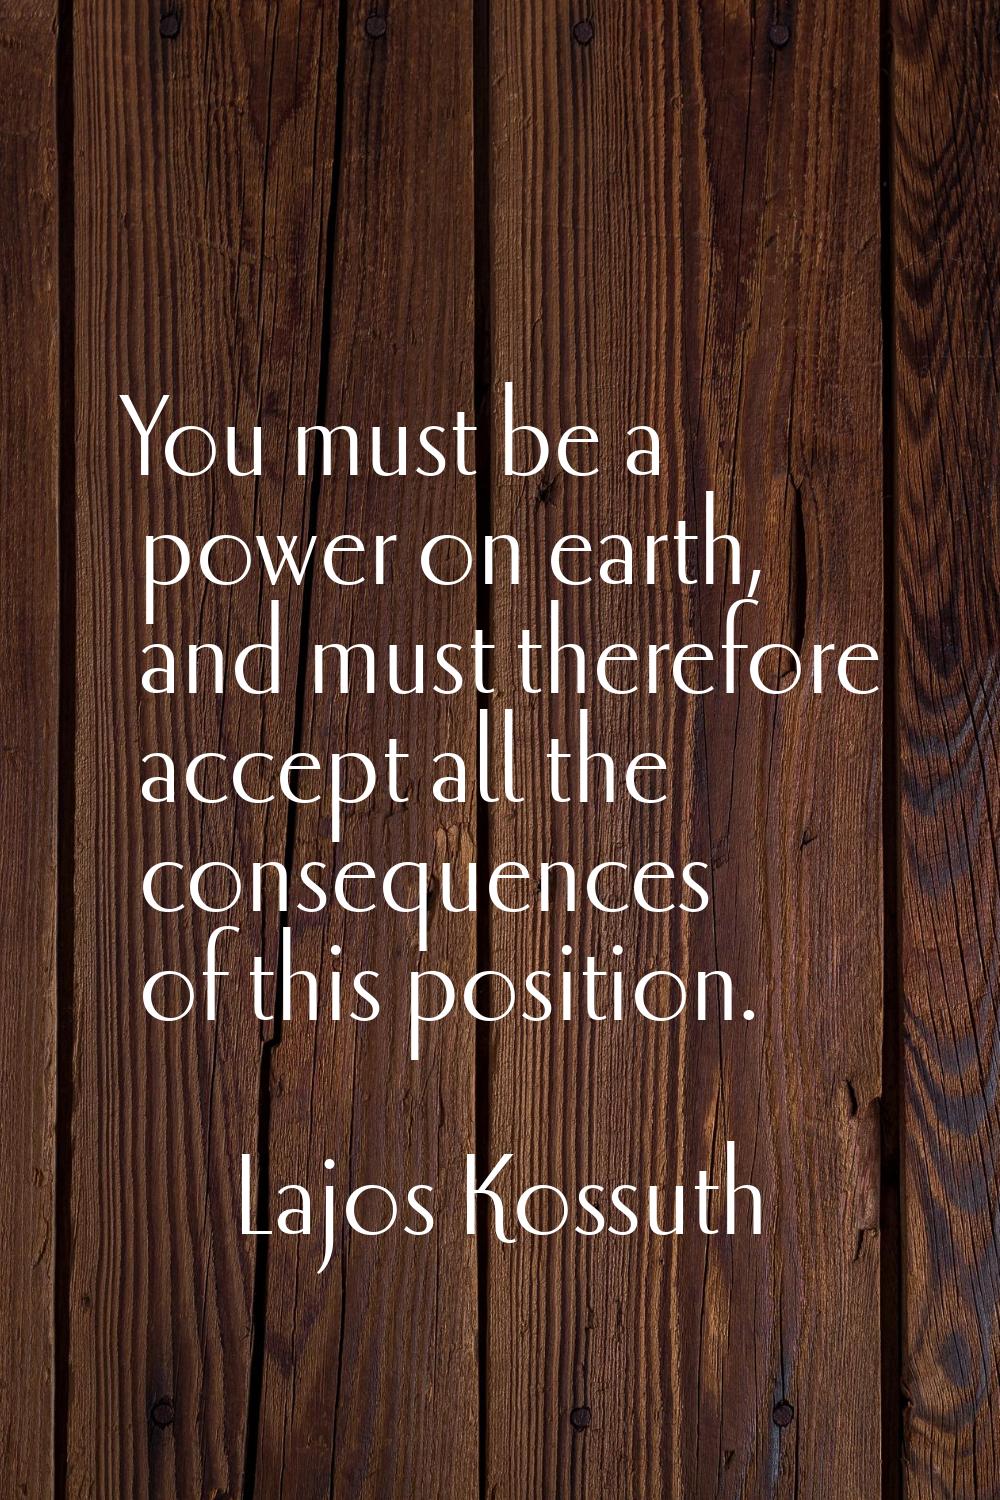 You must be a power on earth, and must therefore accept all the consequences of this position.